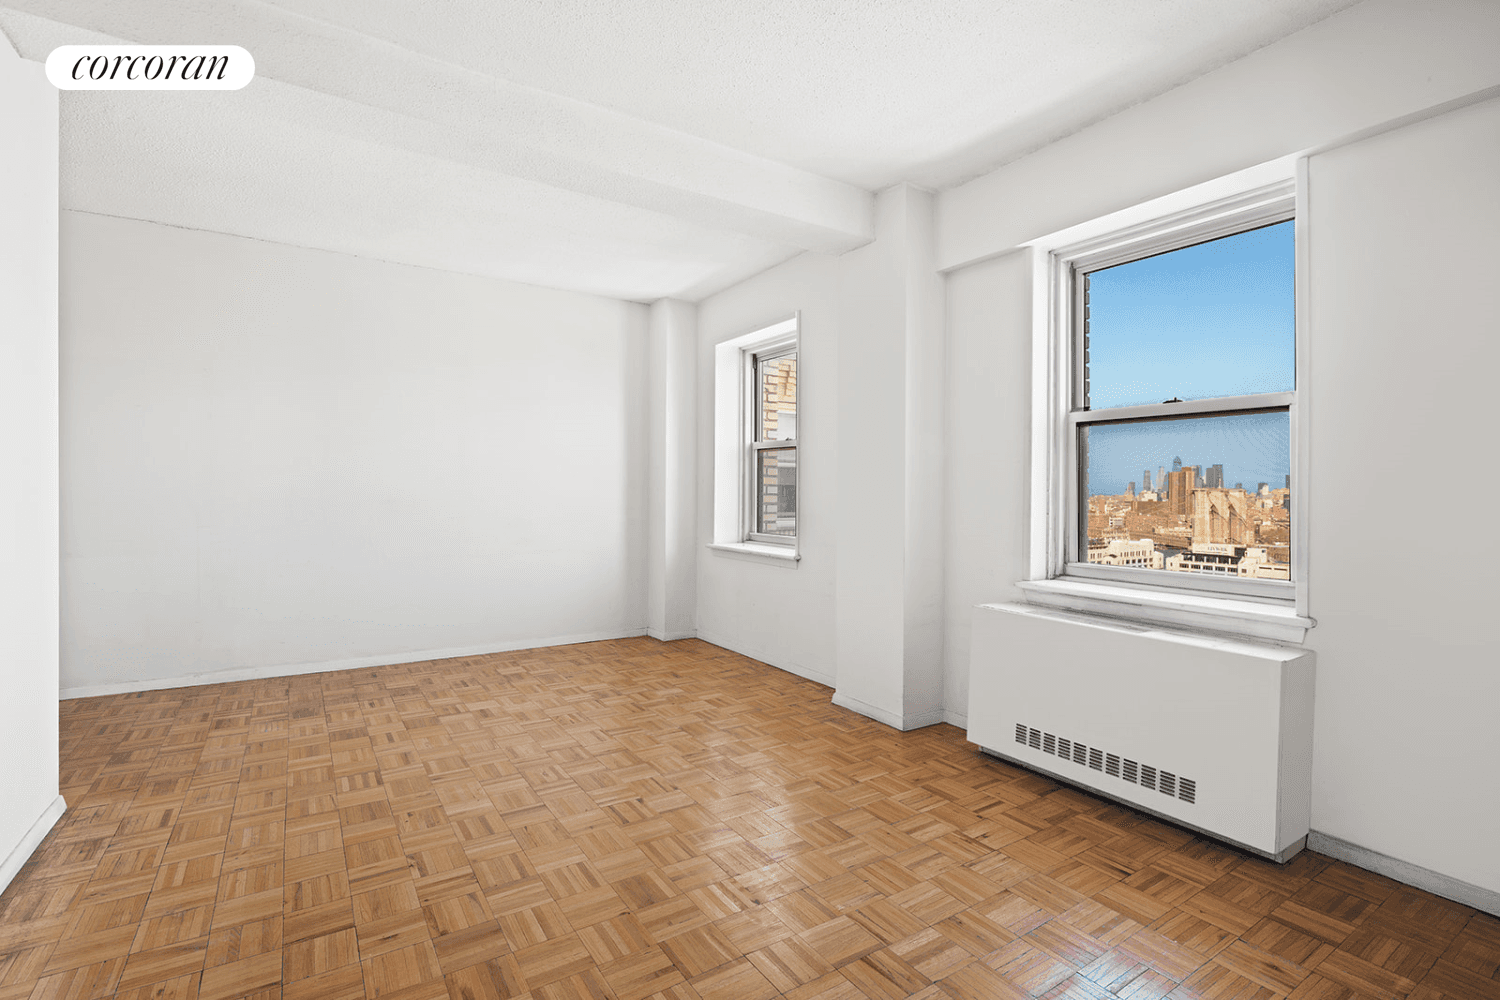 ALL OPEN HOUSE SHOWINGS REQUIRE AN APPOINTMENT WITH THE LISTING AGENT Residence 18H at 111 Hicks St is the perfect Brooklyn Heights find for those seeking a blank canvas with ...